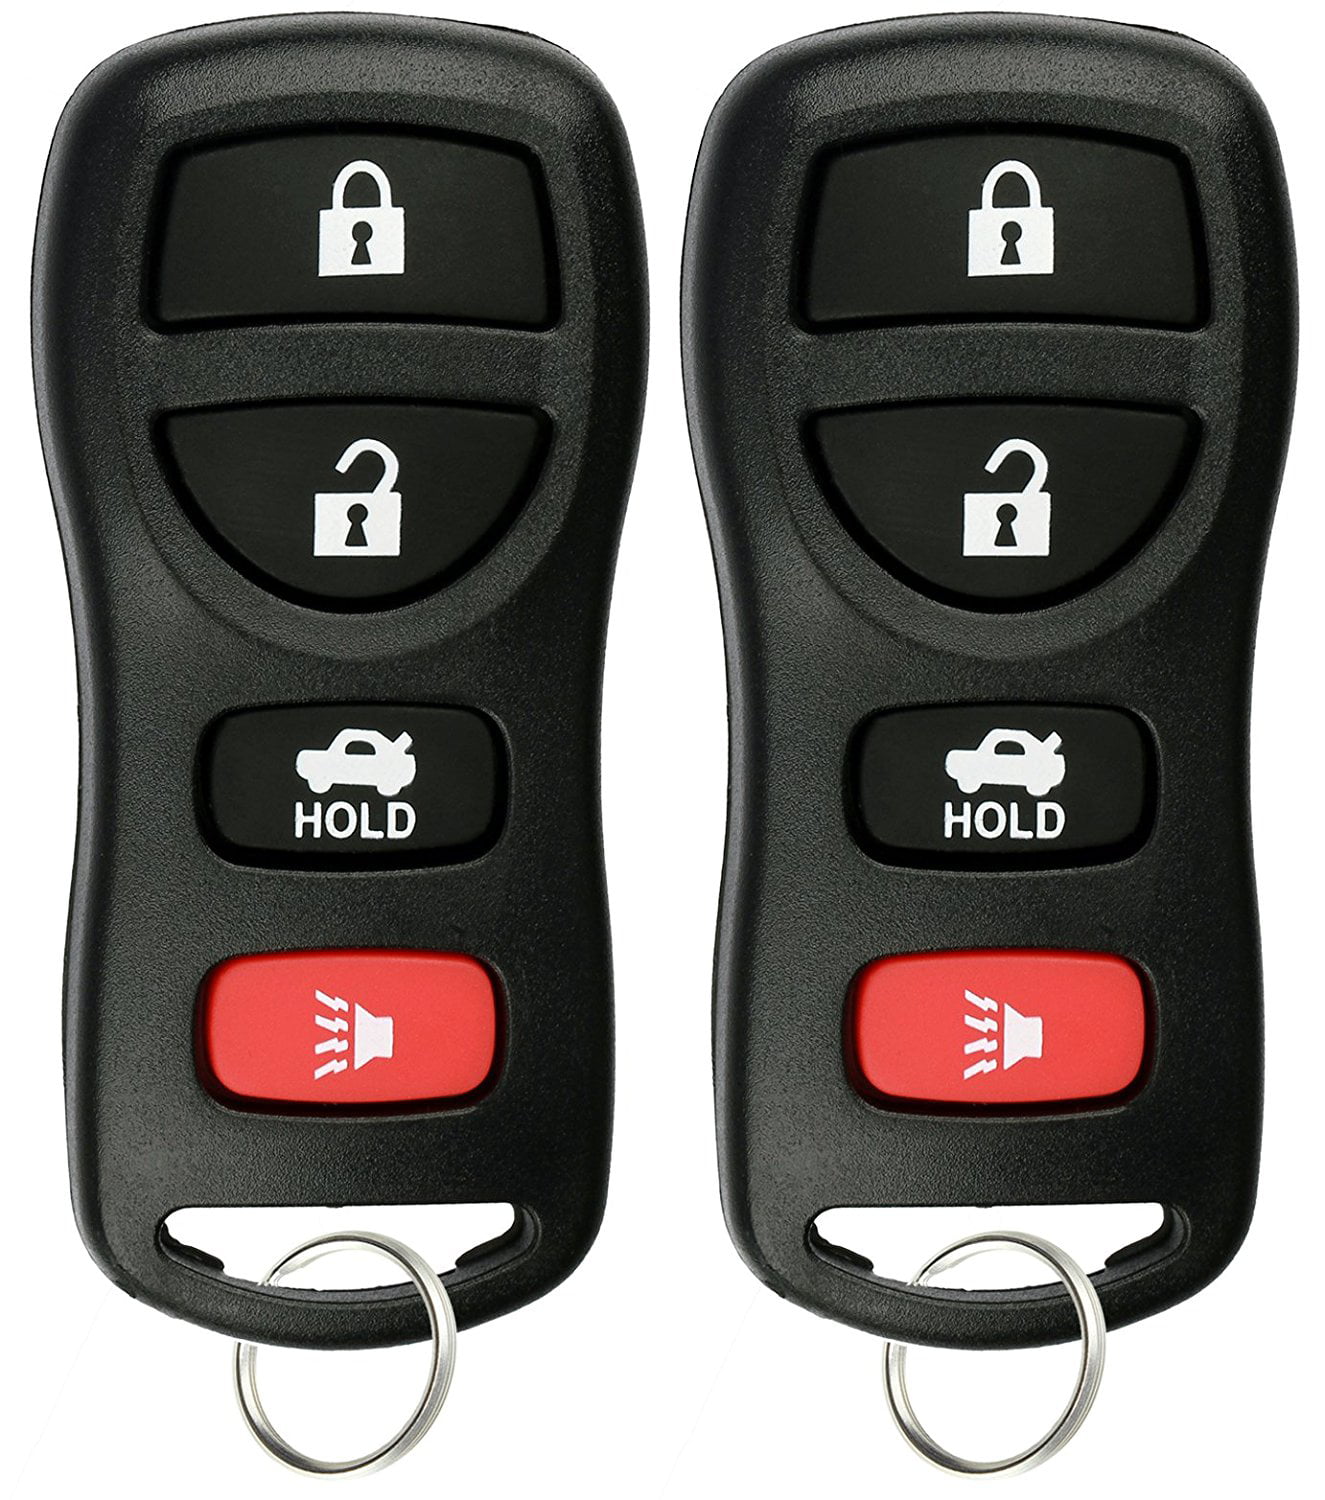 NEW Keyless Entry Key Fob Remote For a 2004 Hummer H2 CASE ONLY REPAIR KIT